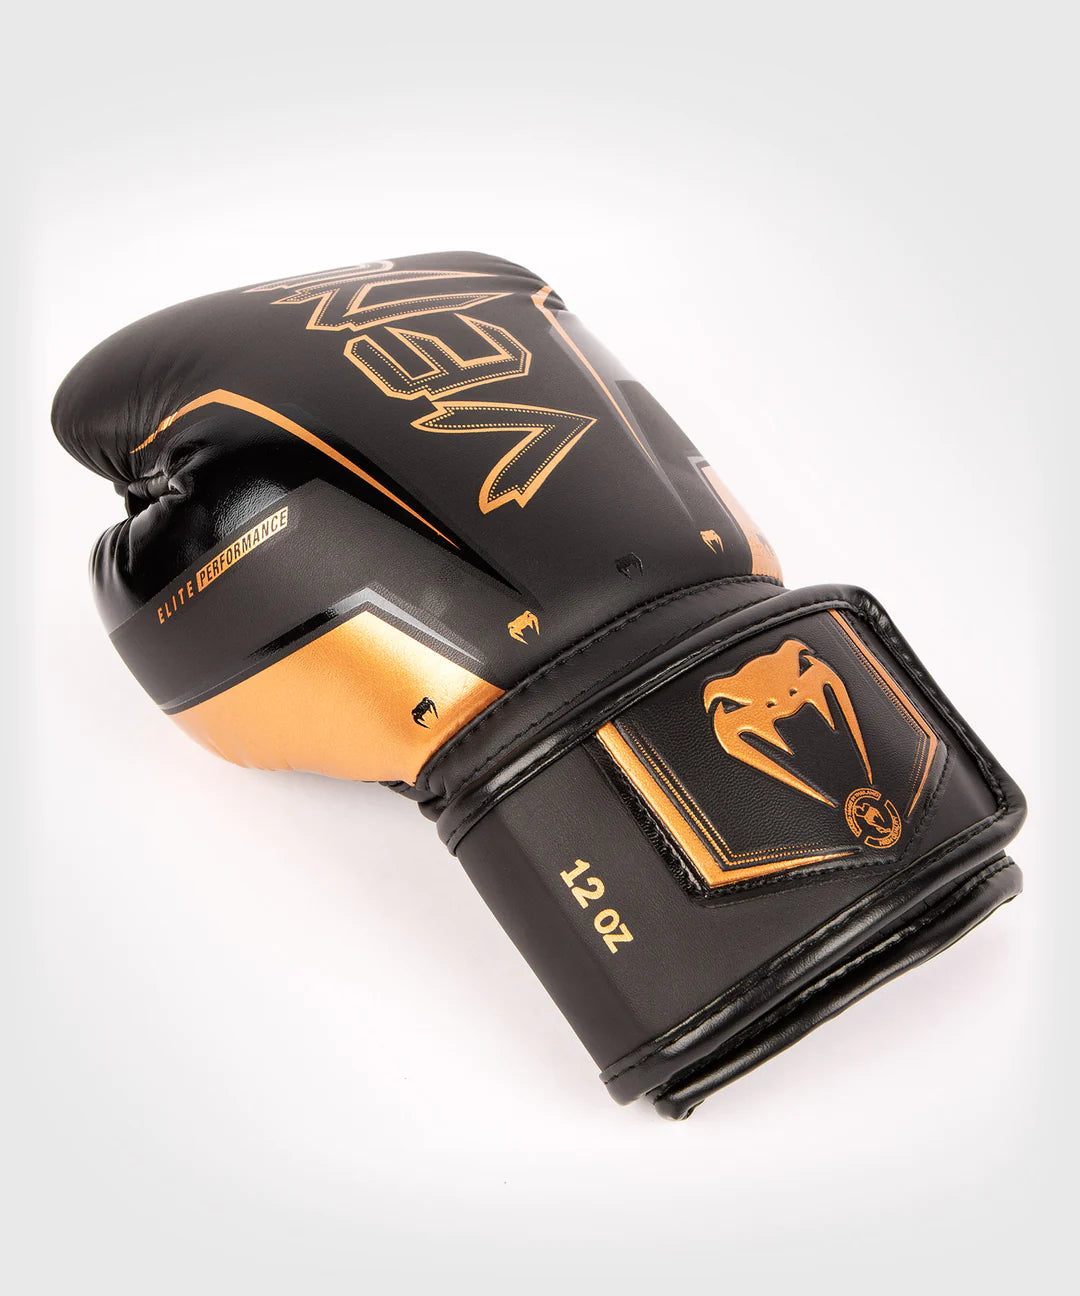 Elite Evo 2.0 Boxing Gloves for combat sports with synthetic leather and shock absorption. Top View